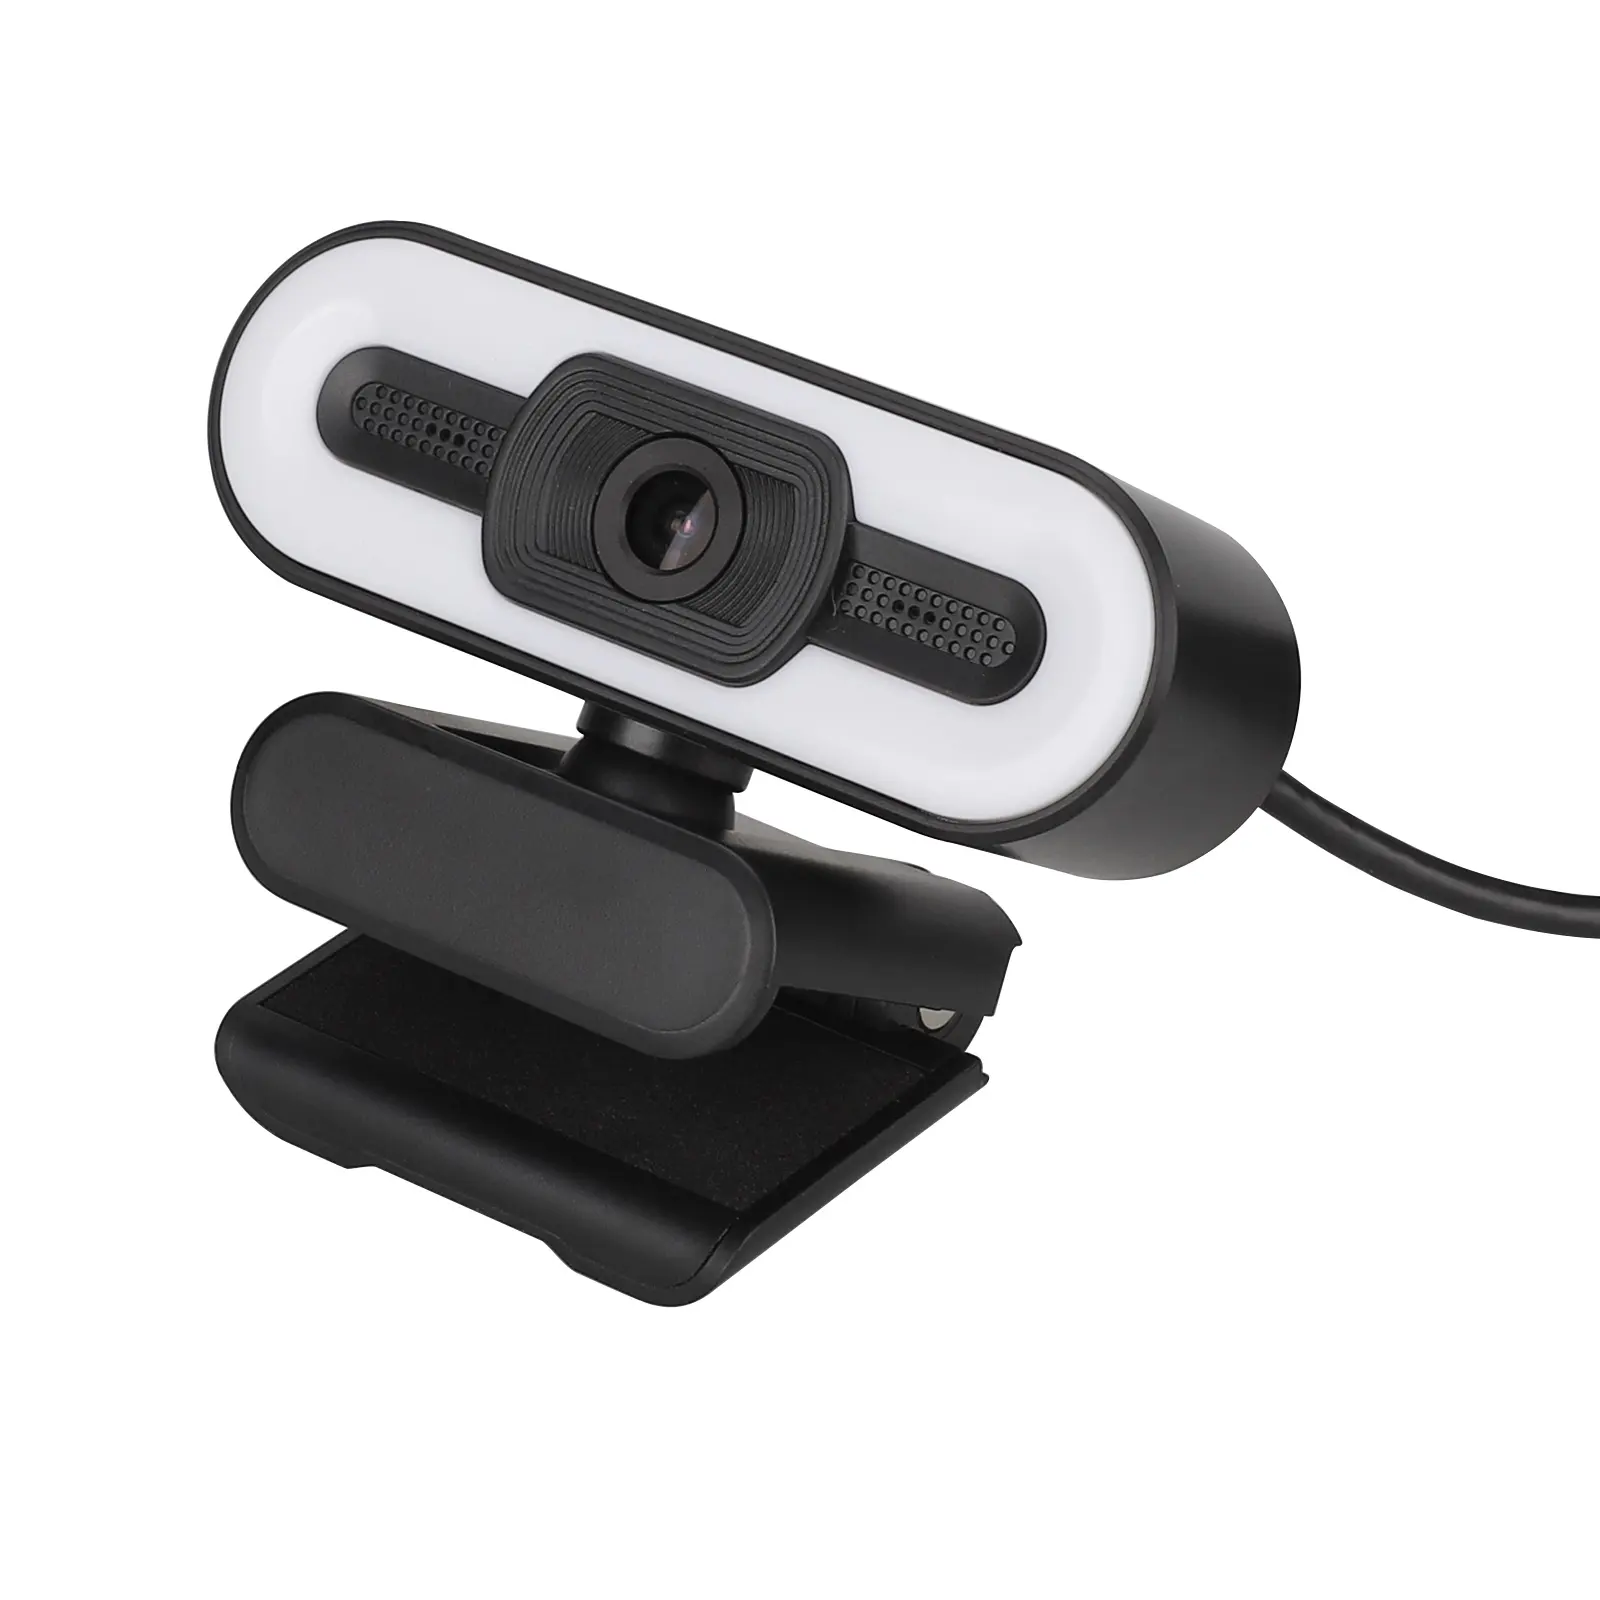 360 Degree Touch Adjustment With Mic 1080p Led Light for Video Chat and Teleconferencing Online with Light Adjustm